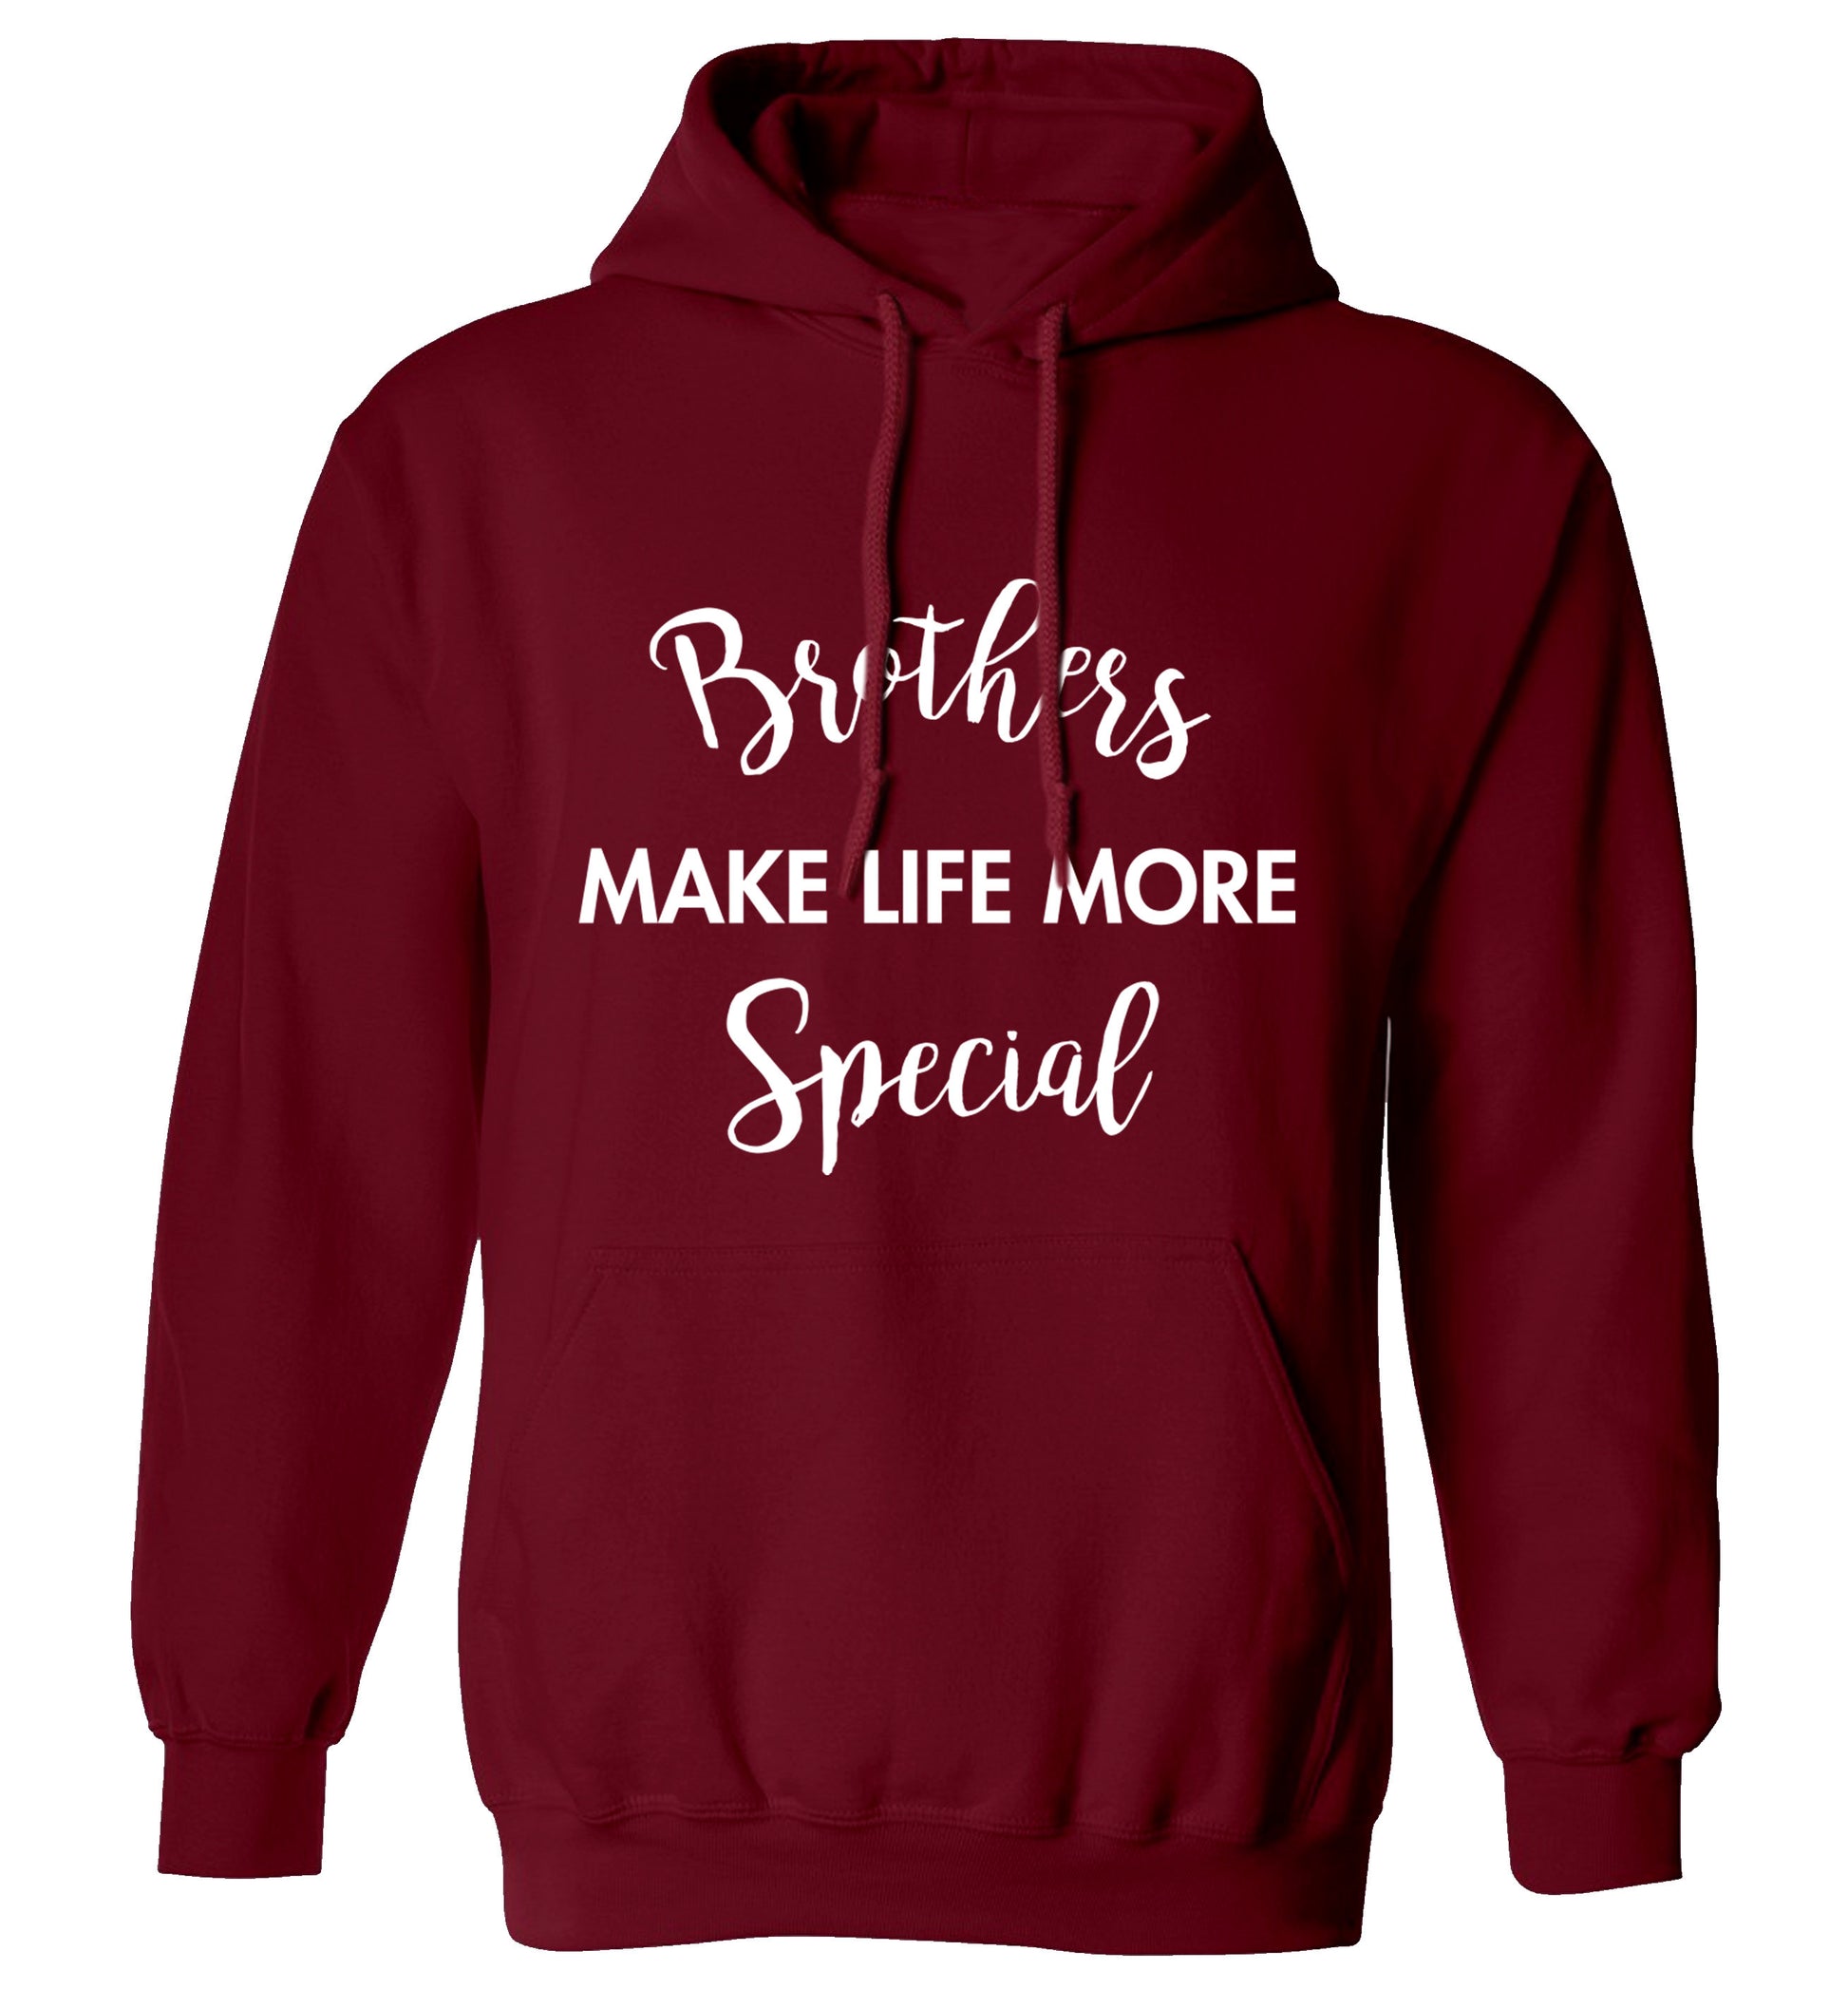 Brothers make life more special adults unisex maroon hoodie 2XL